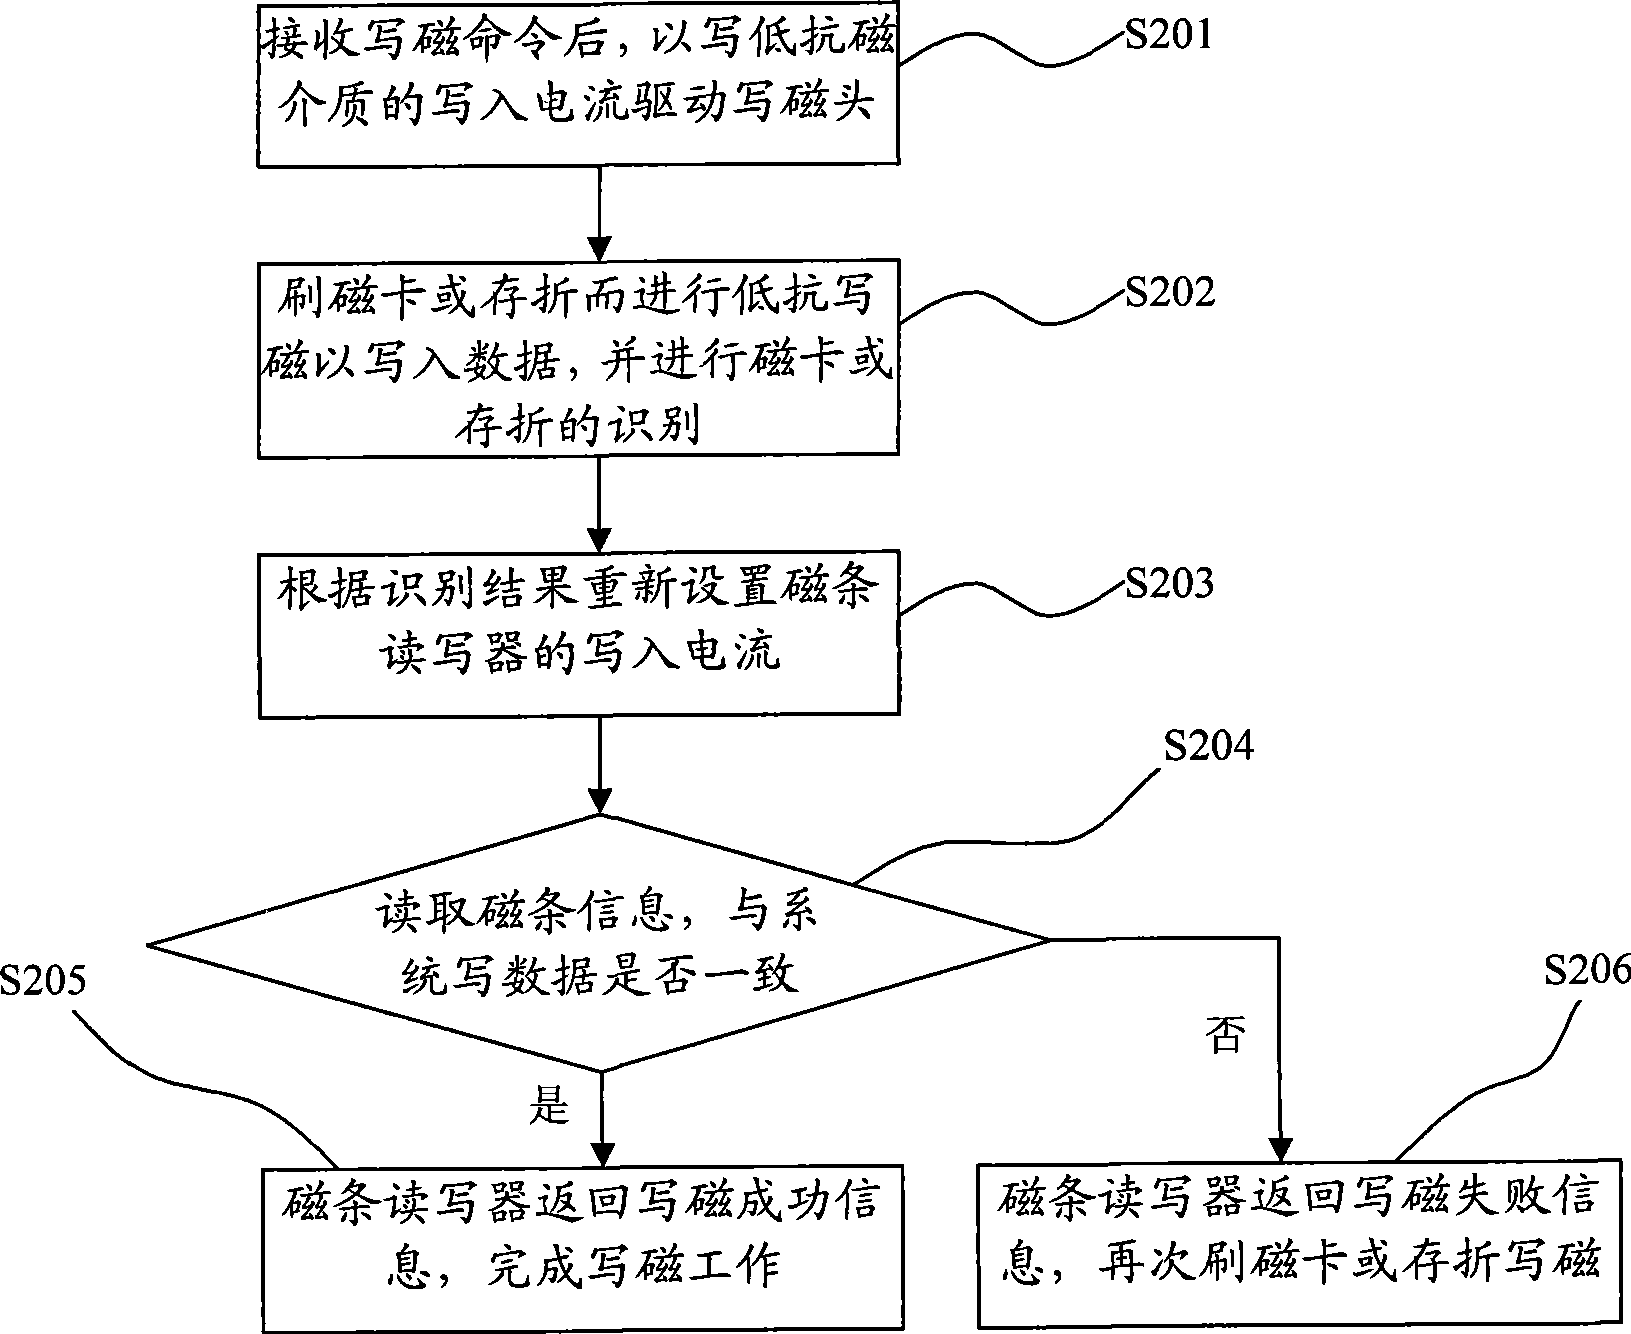 Magnetic writing control method for magnetic strip read/write device